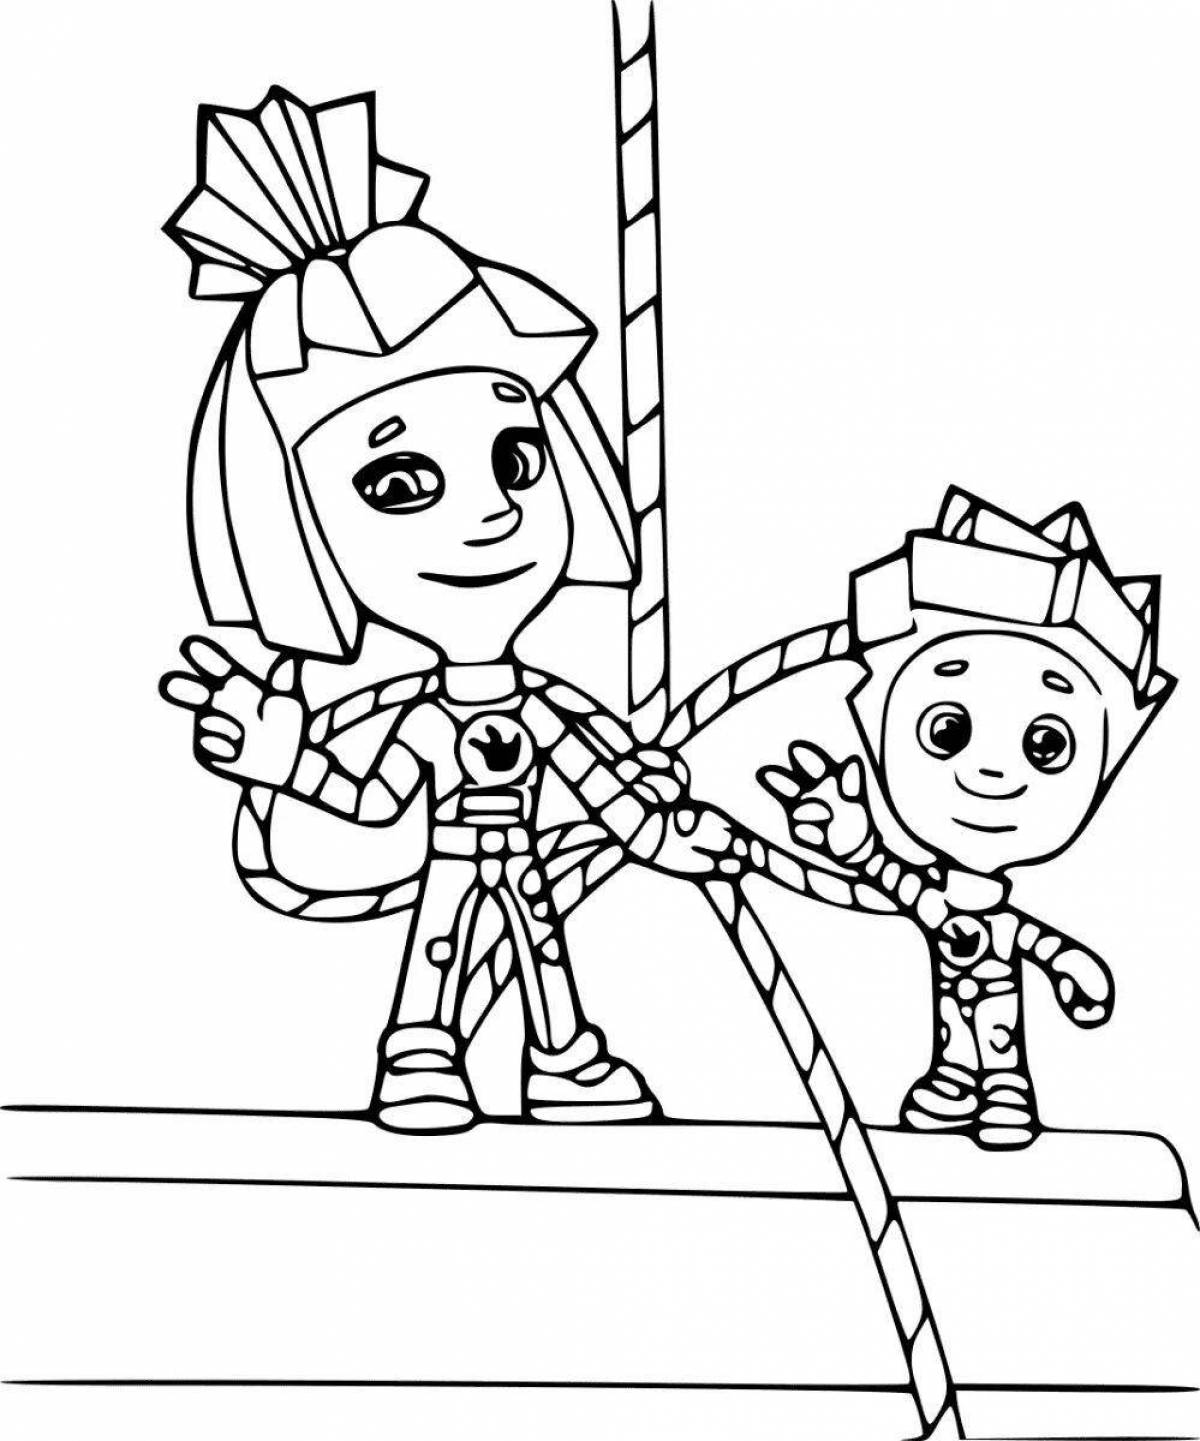 Fixies Railroad Playful Coloring Page